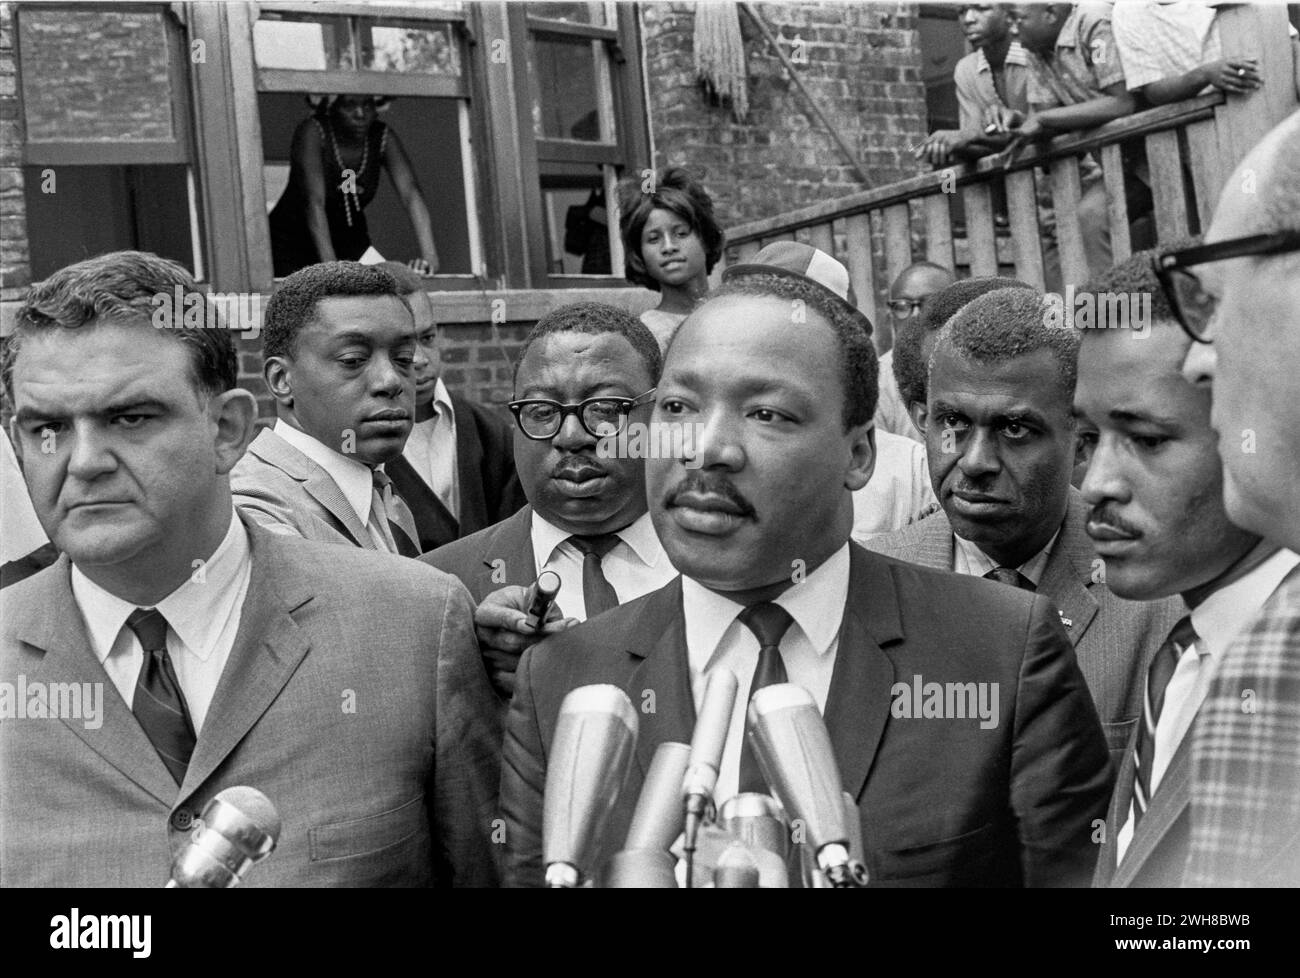 Dr Martin Luthur King and Civil Rights Leader Delivers a Speech Surrounded by Associates and Onlookers Stock Photo